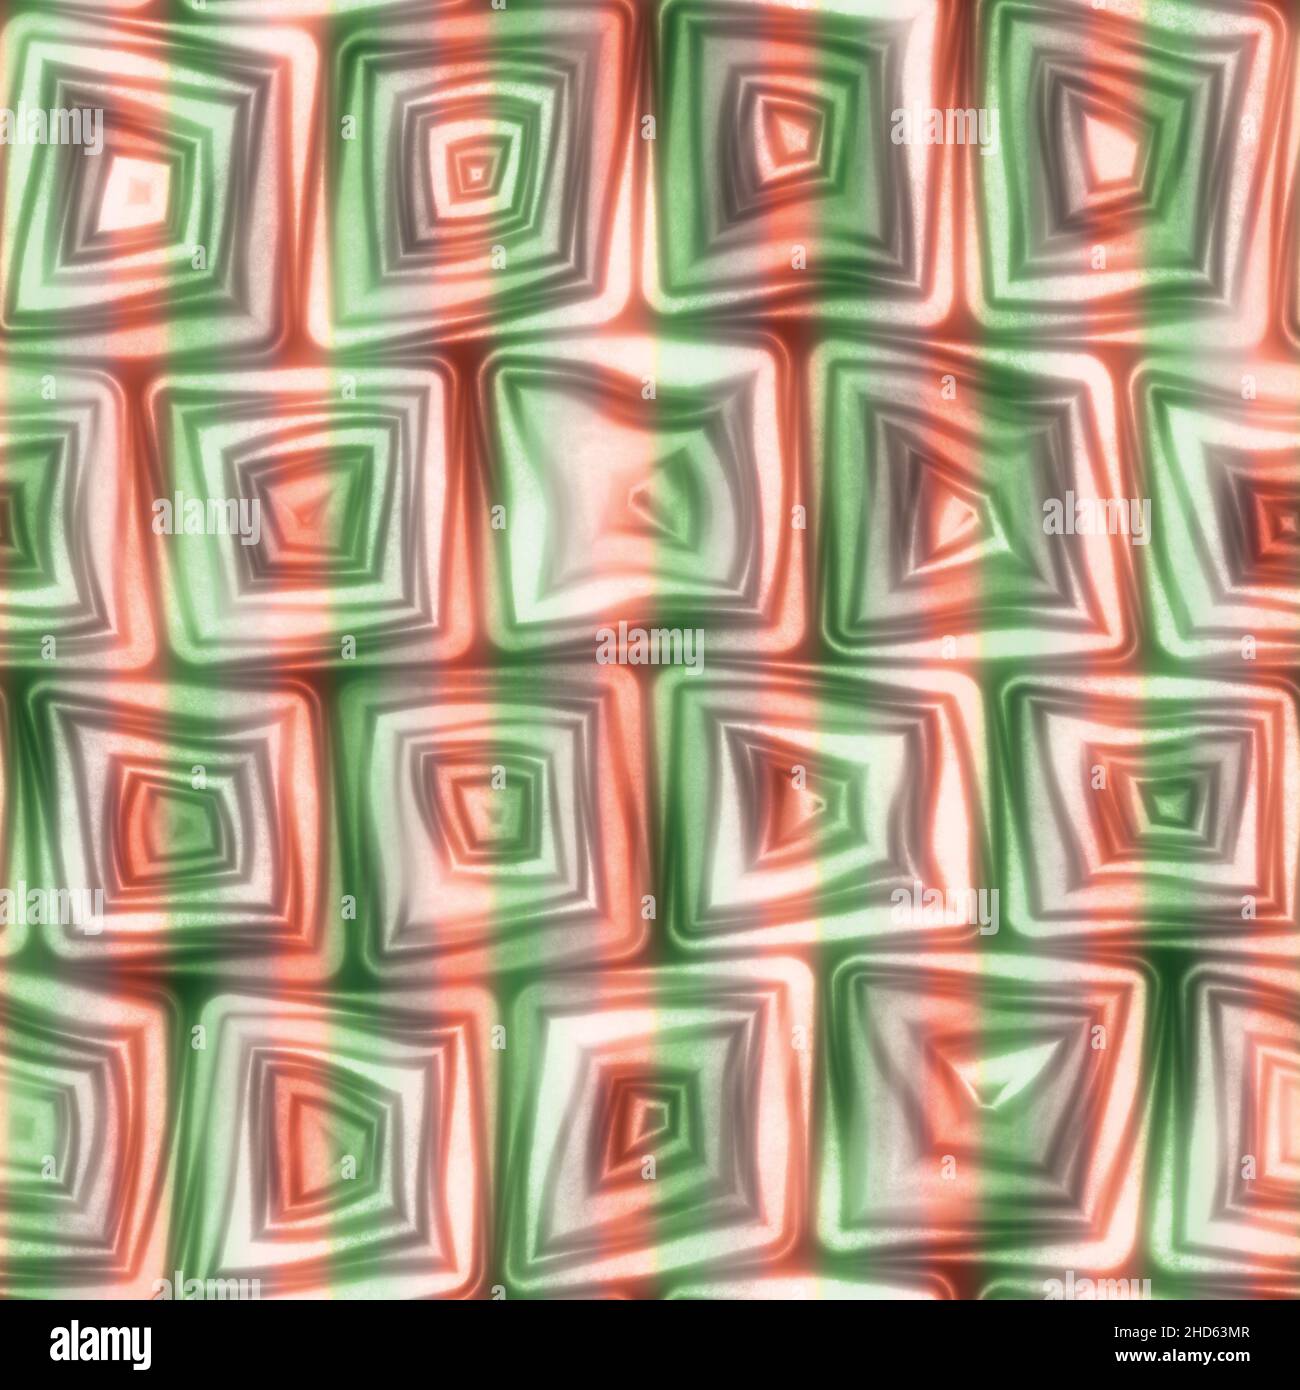 Large Christmas Candy Cane Stripes Squiggly Swirly Spiral Squares Seamless Texture Pattern Stock Photo